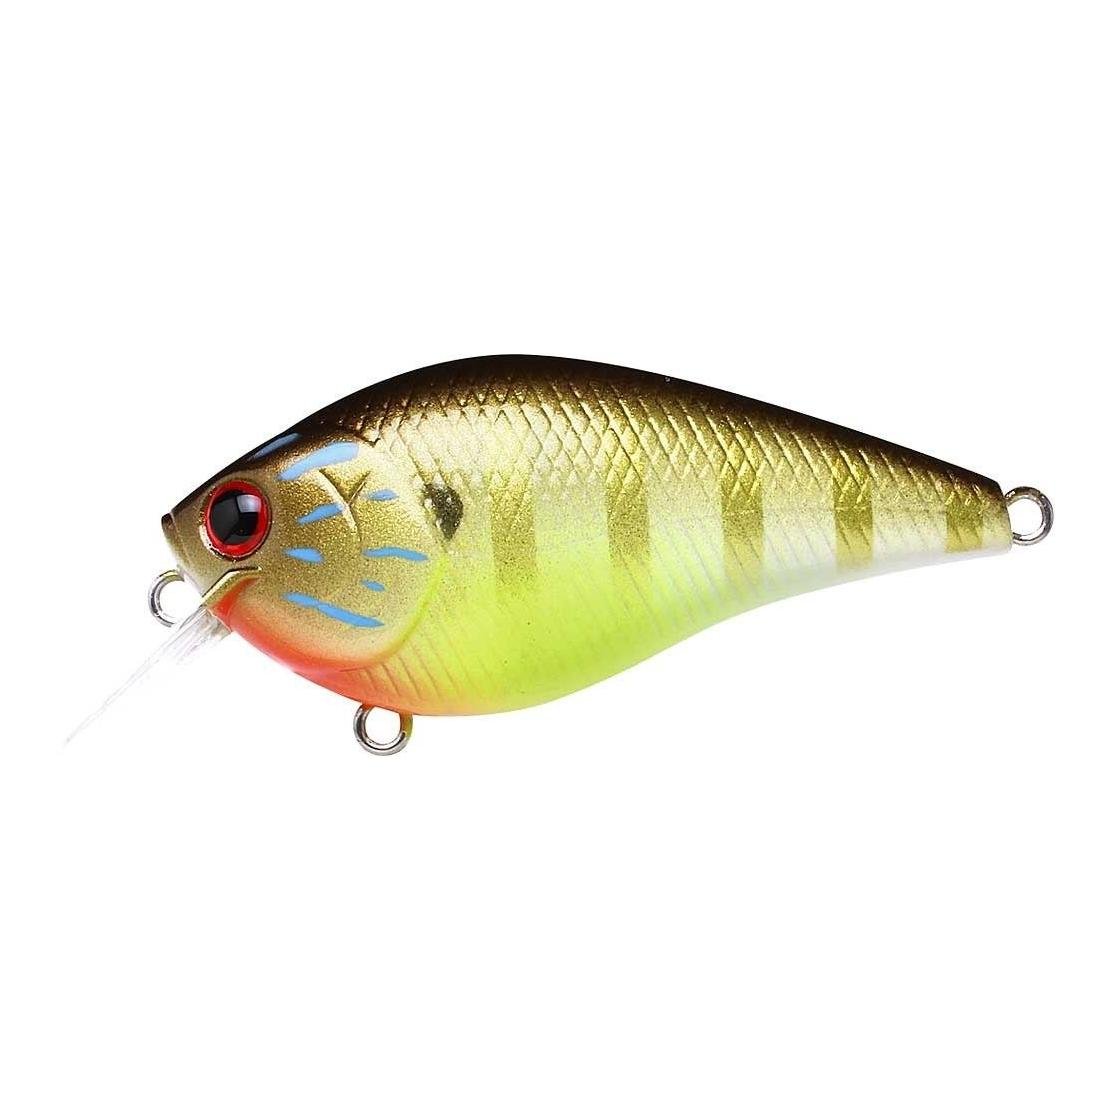 Lucky Craft LC 1.5 MS American Shad - Crankbait - MS American Shad